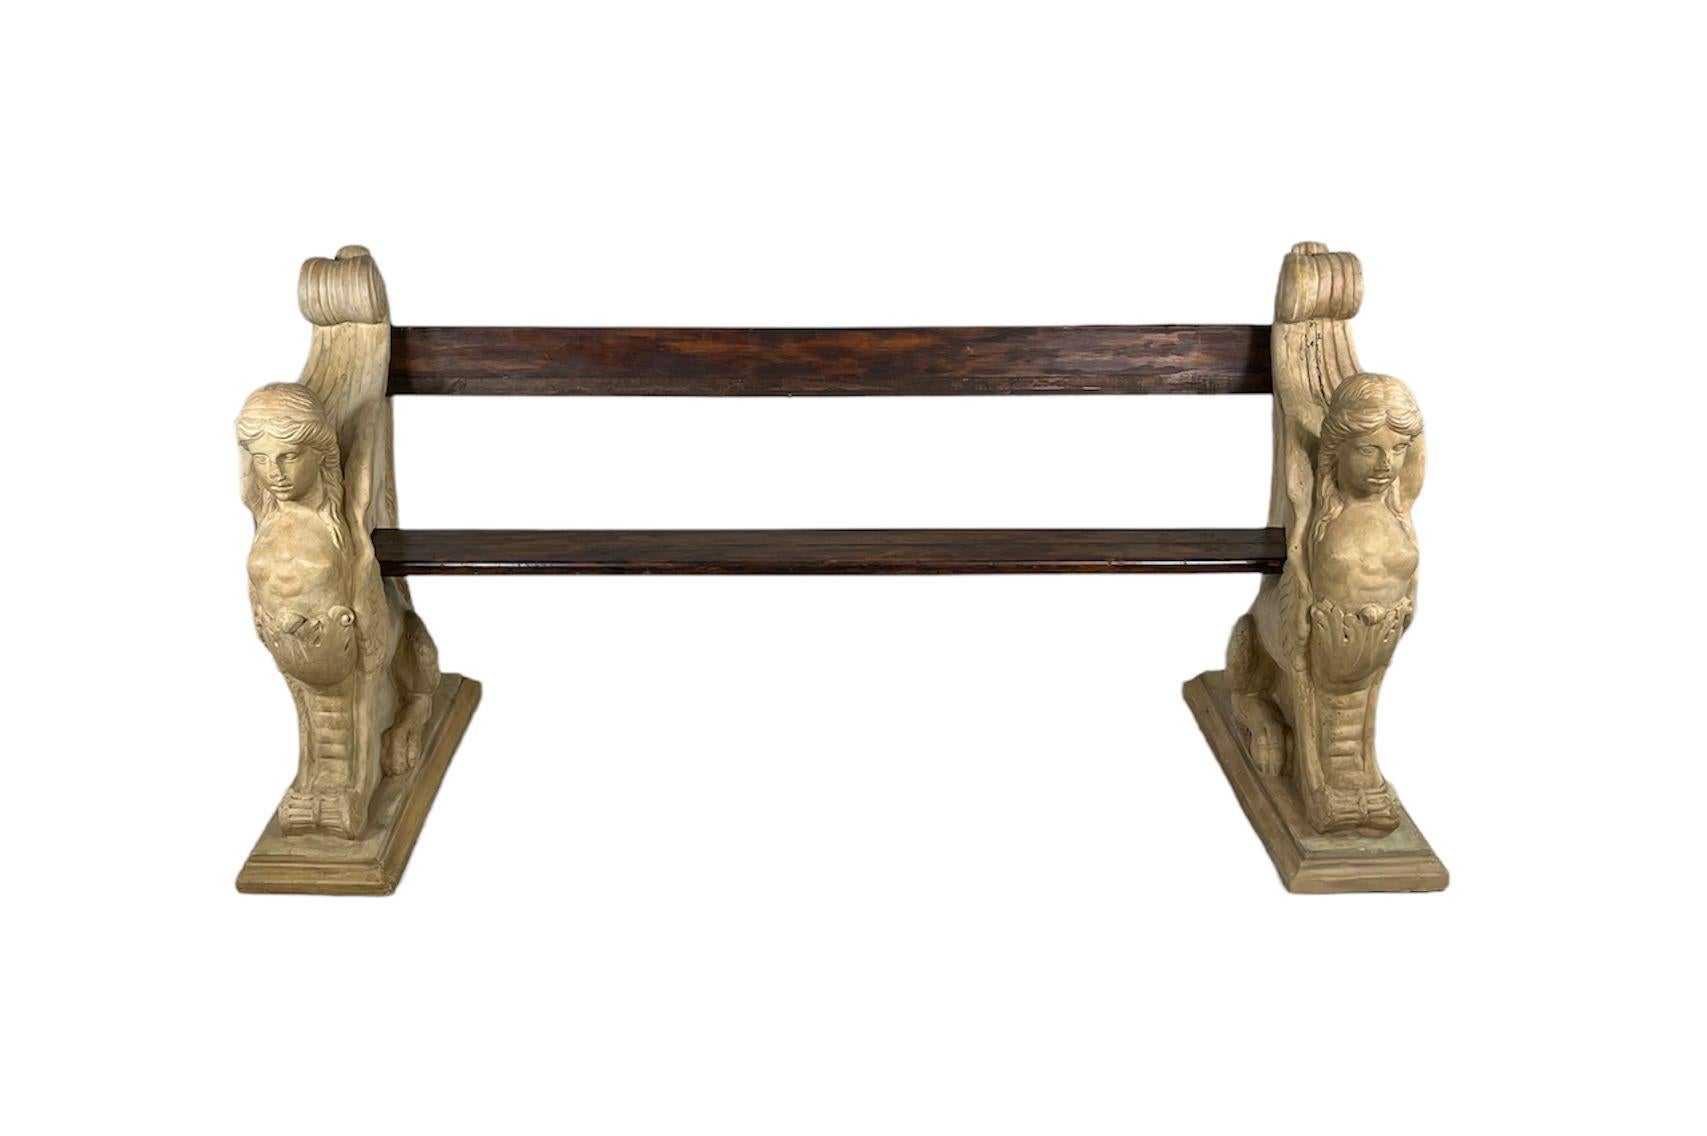 Hand-Carved Circa 1925 Italian Neoclassical Greek Revival Bench by P. Mazzetti For Sale